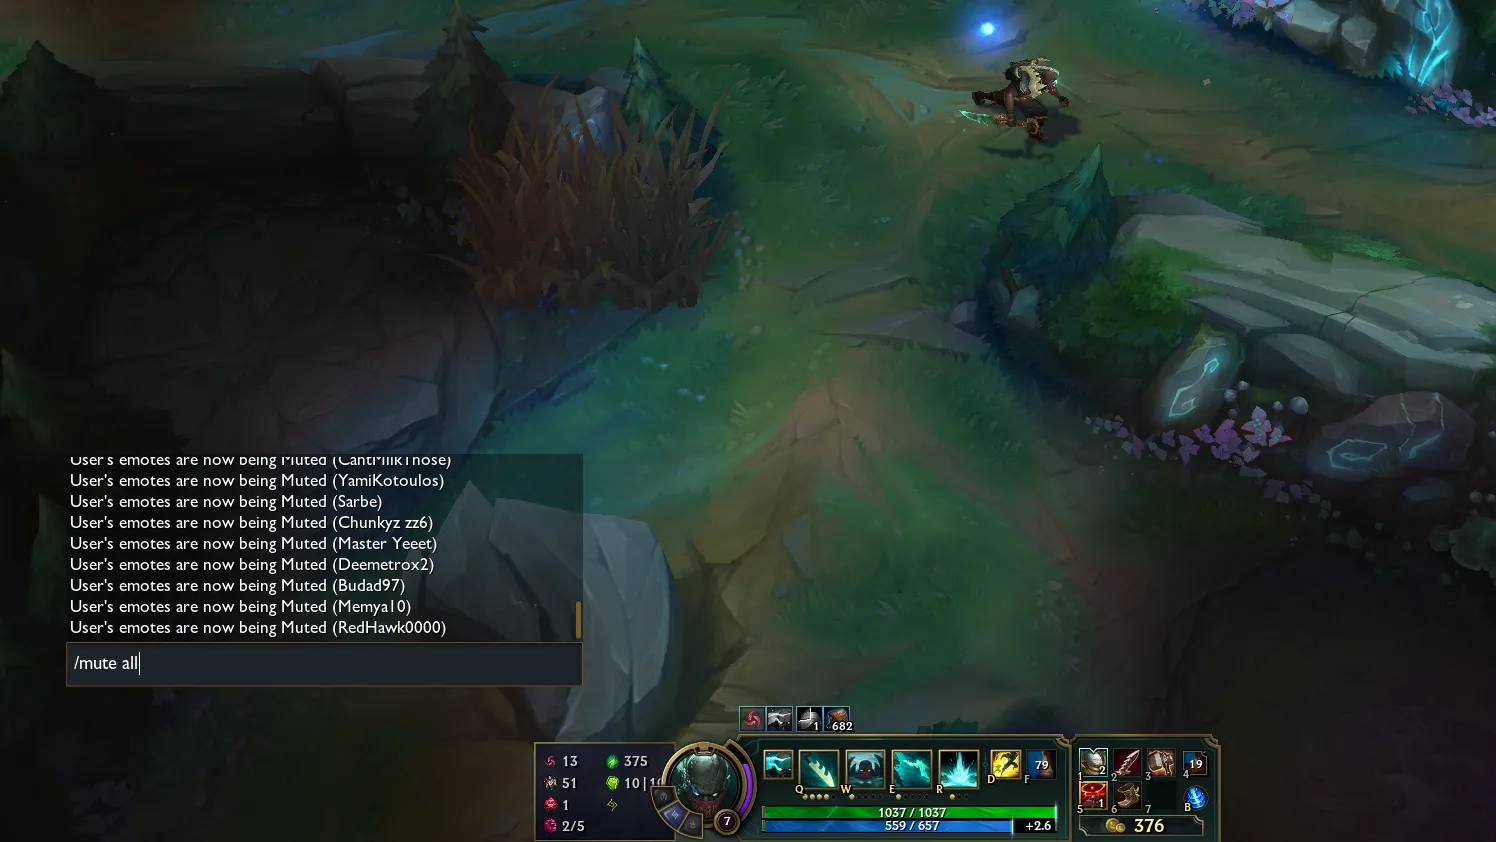 League of Legends - Mute all chat command